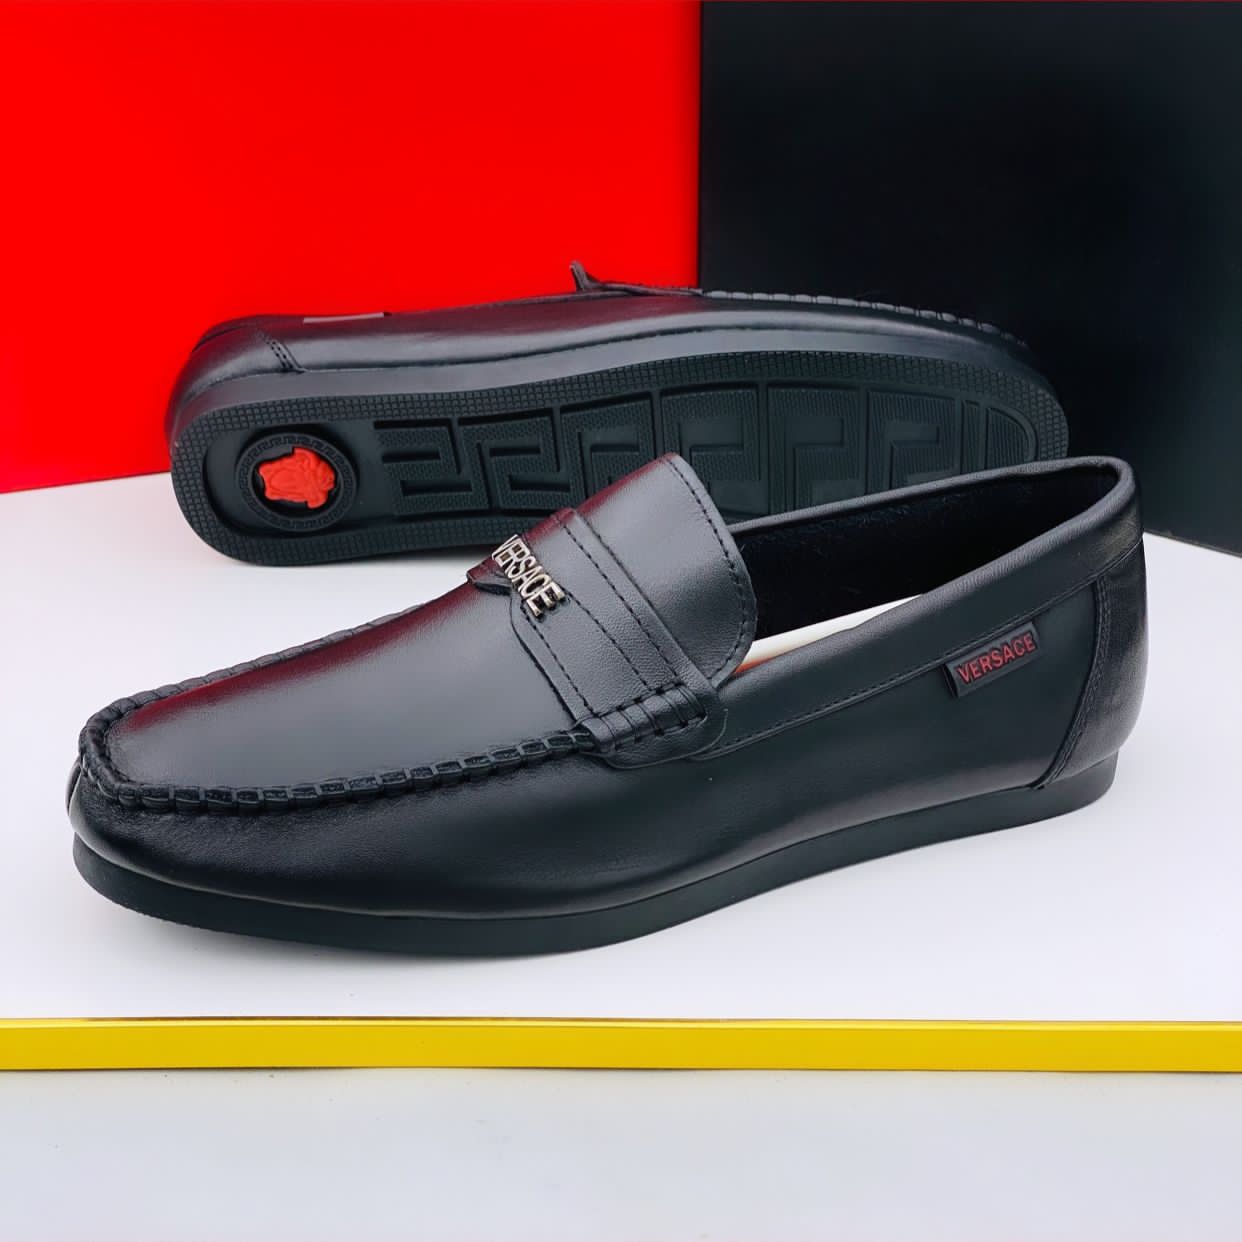 Versace Executive Black Leather Loafer Shoe | Buy Online At The Best ...